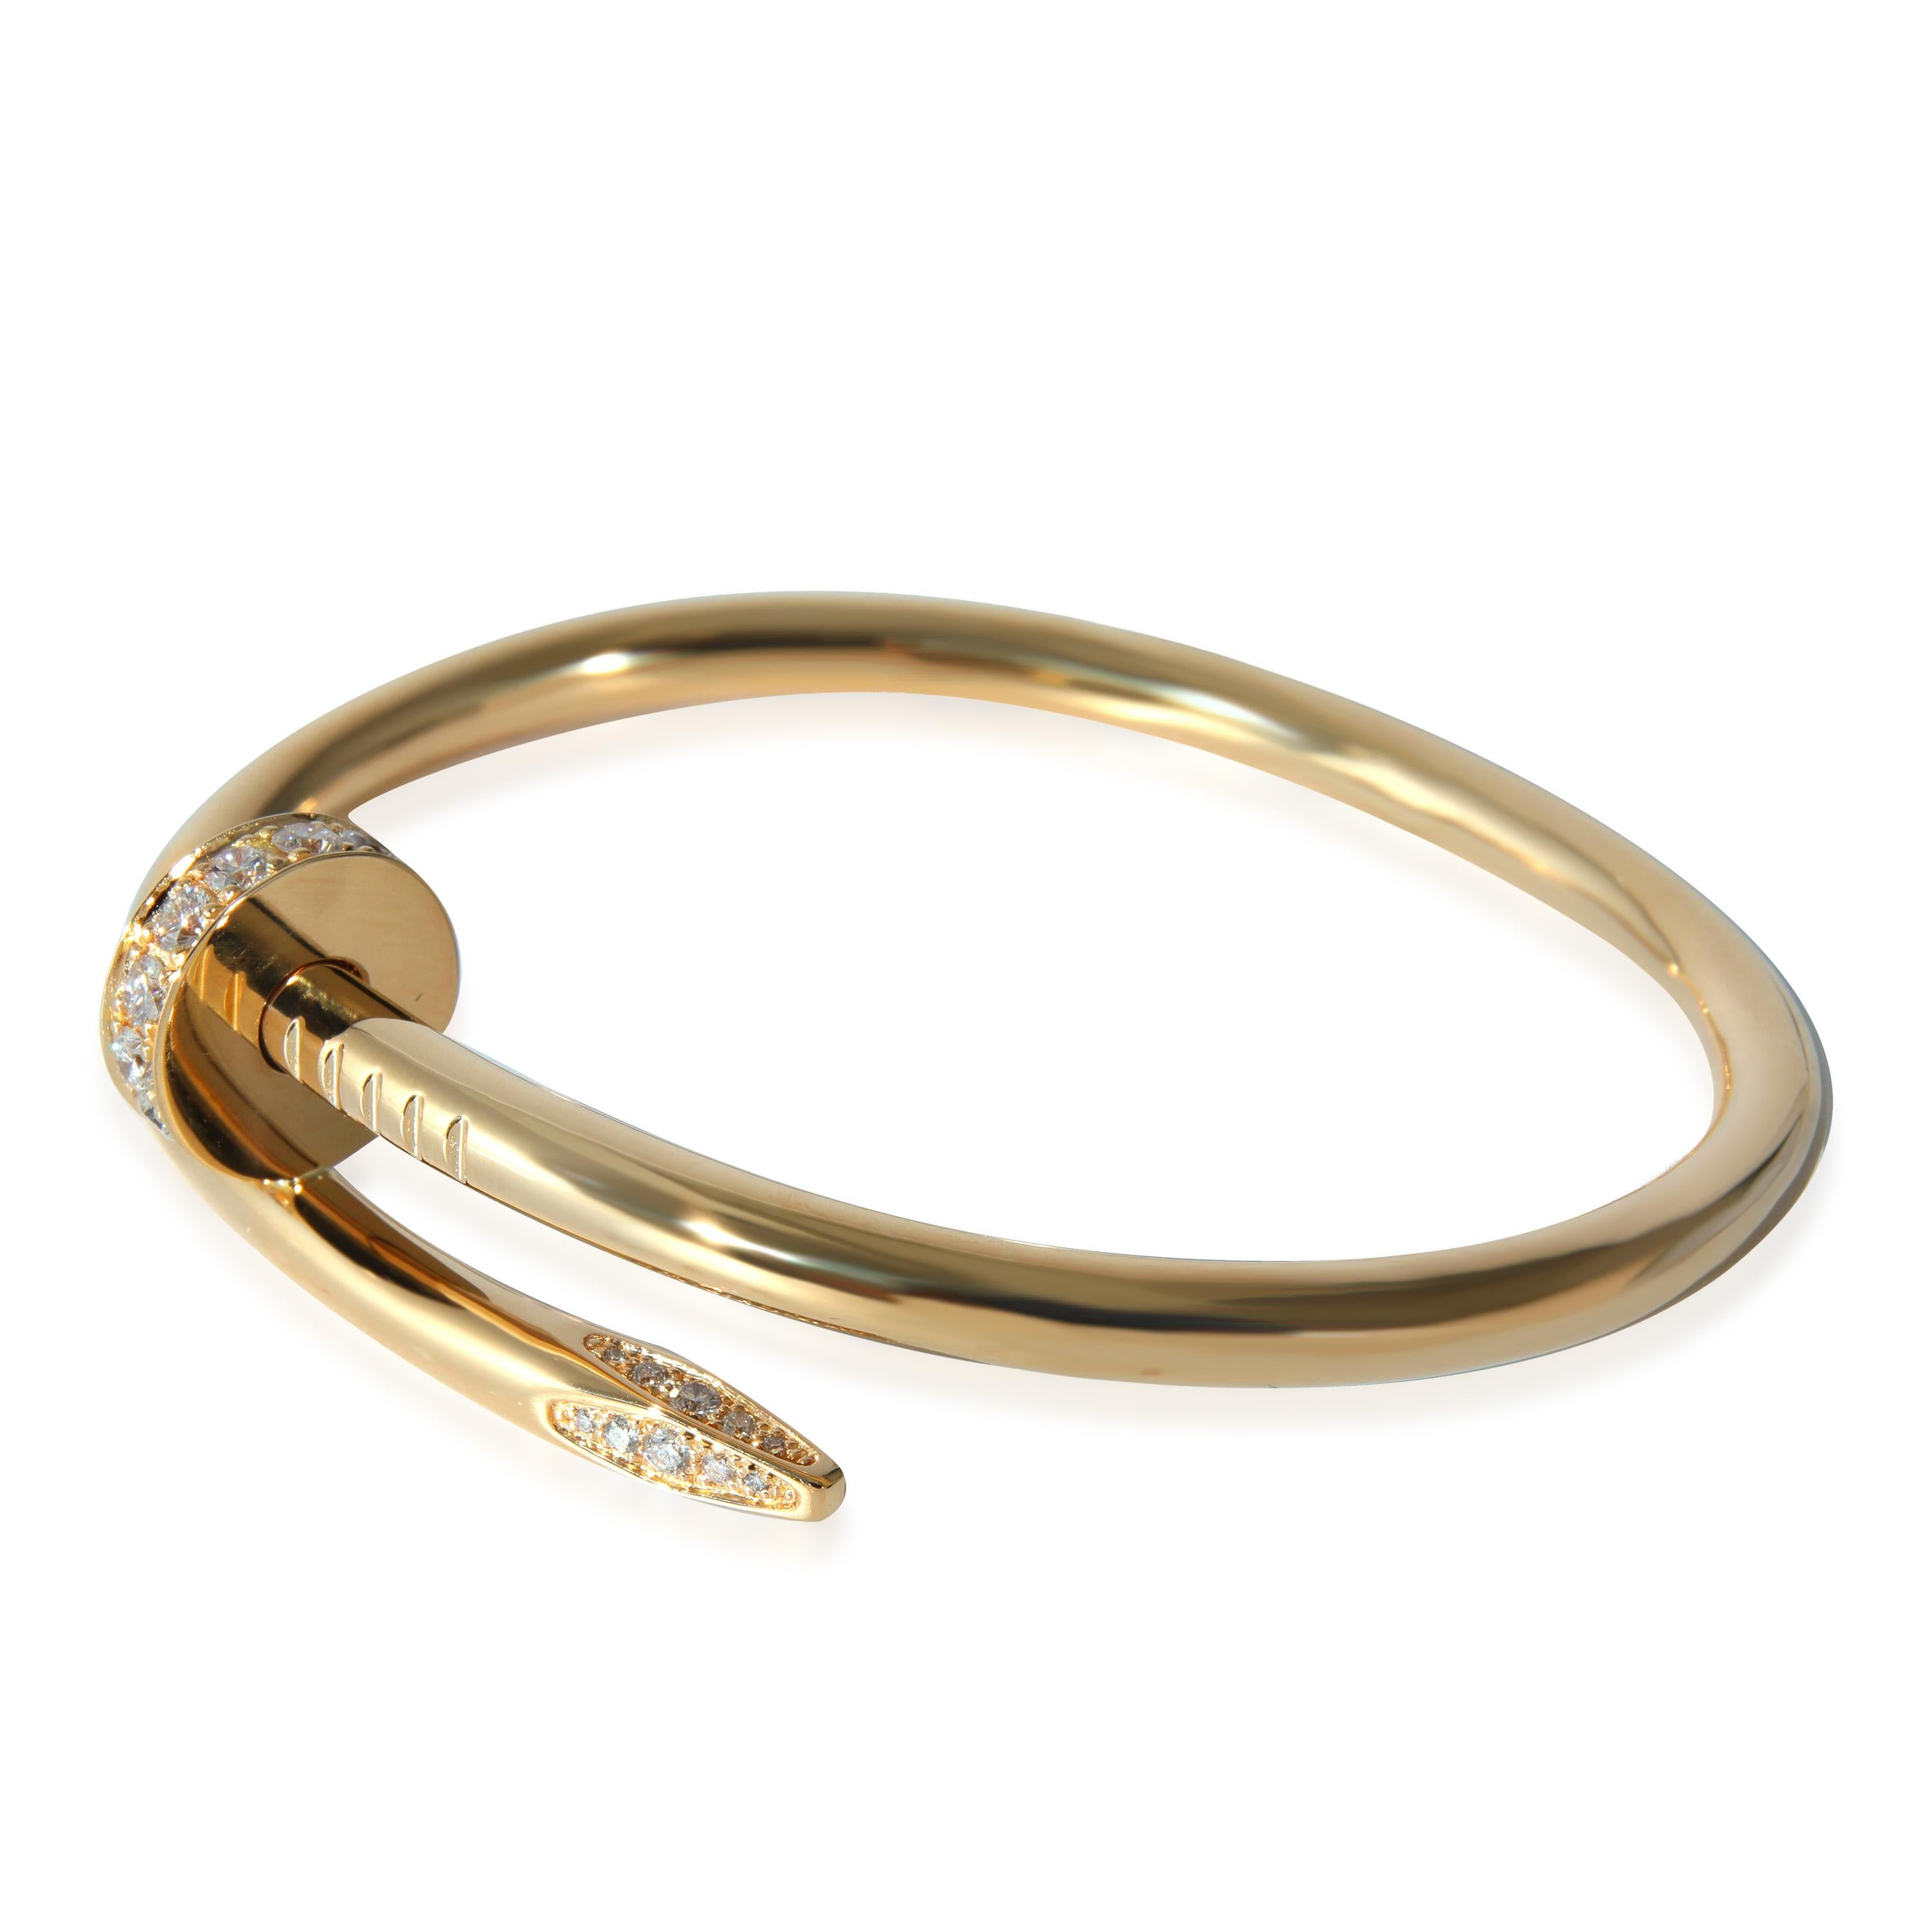 Cartier Juste Un Clou Bracelet in 18k Yellow Gold 0.58 CTW

PRIMARY DETAILS
SKU: 132275
Listing Title: Cartier Juste Un Clou Bracelet in 18k Yellow Gold 0.58 CTW
Condition Description: Translating to 'just a nail', the Juste Un Clou collection from